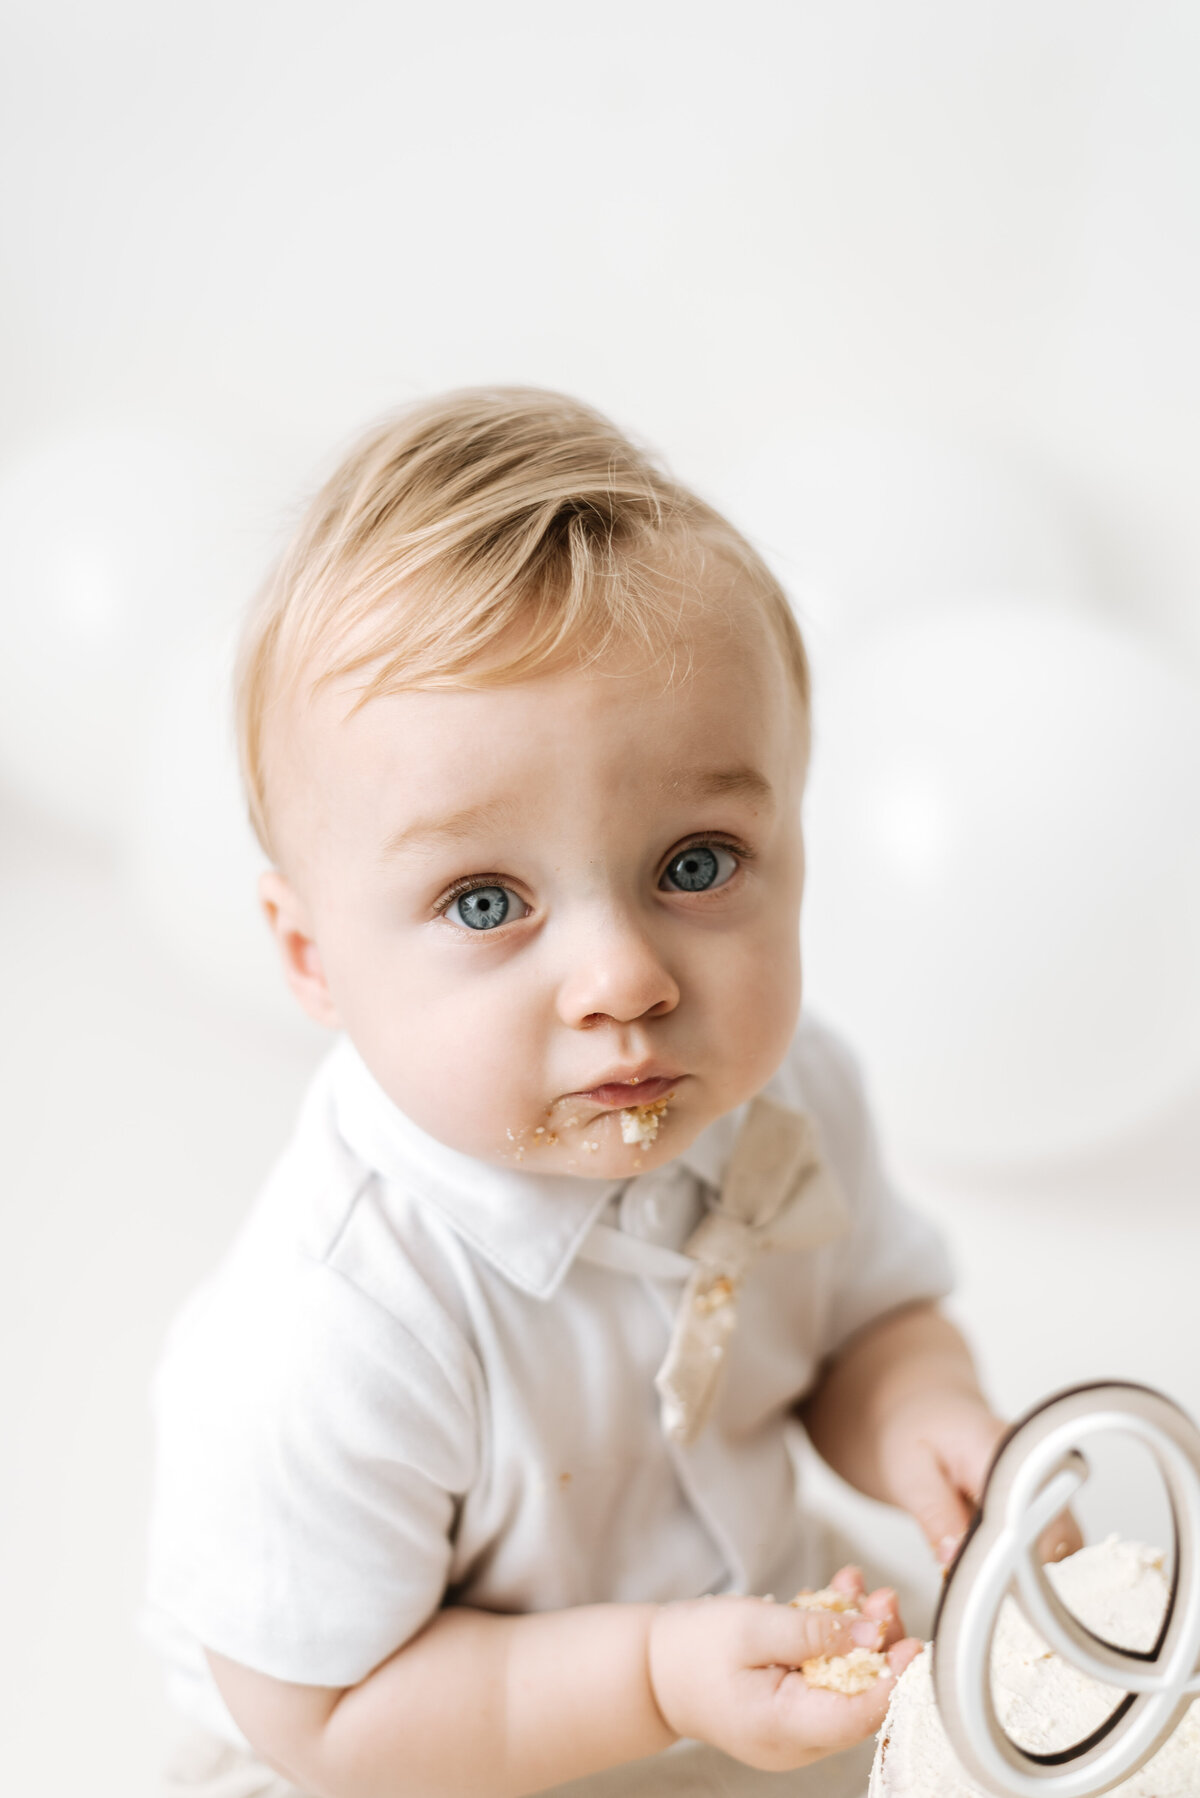 Baby boy with cake on his face at cake smash photoshoot in Billingshurst